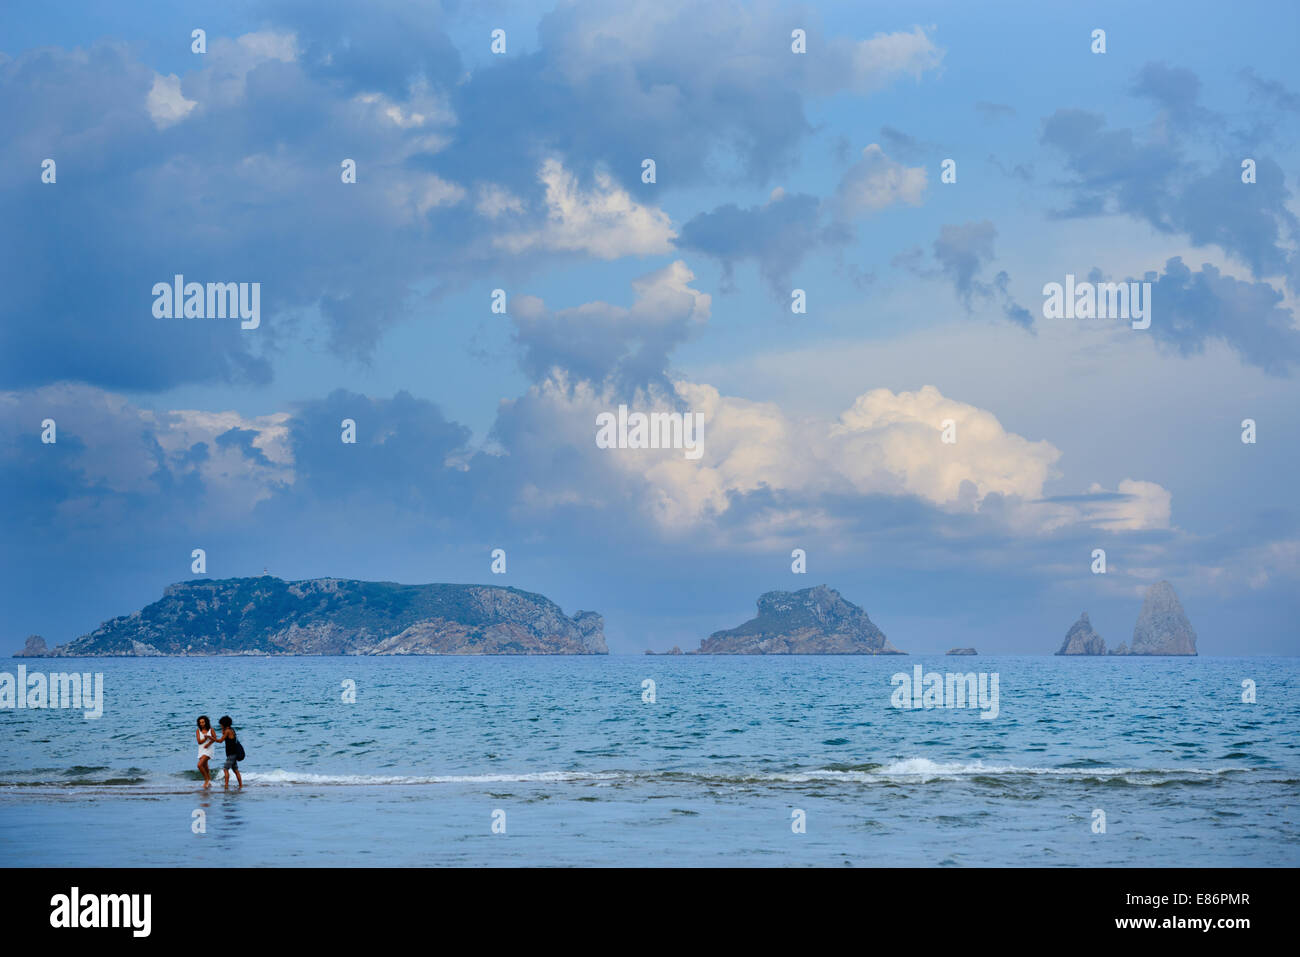 Two young women walk on the shores of the Mediterranean, in front of the Illes Medes natural park and reserve. Stock Photo